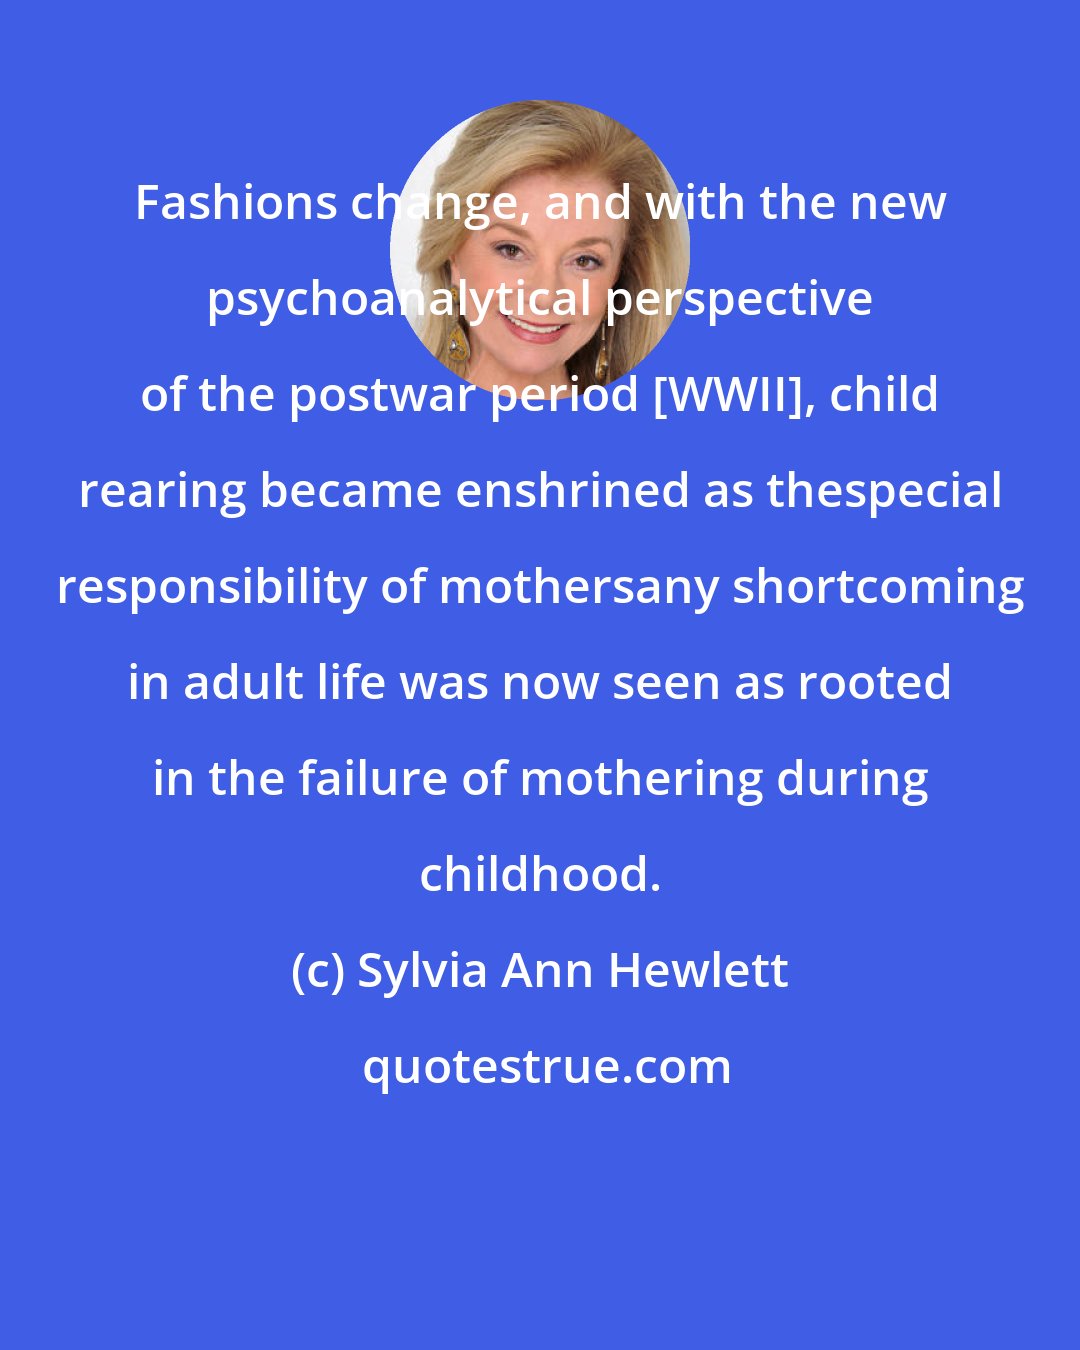 Sylvia Ann Hewlett: Fashions change, and with the new psychoanalytical perspective of the postwar period [WWII], child rearing became enshrined as thespecial responsibility of mothersany shortcoming in adult life was now seen as rooted in the failure of mothering during childhood.